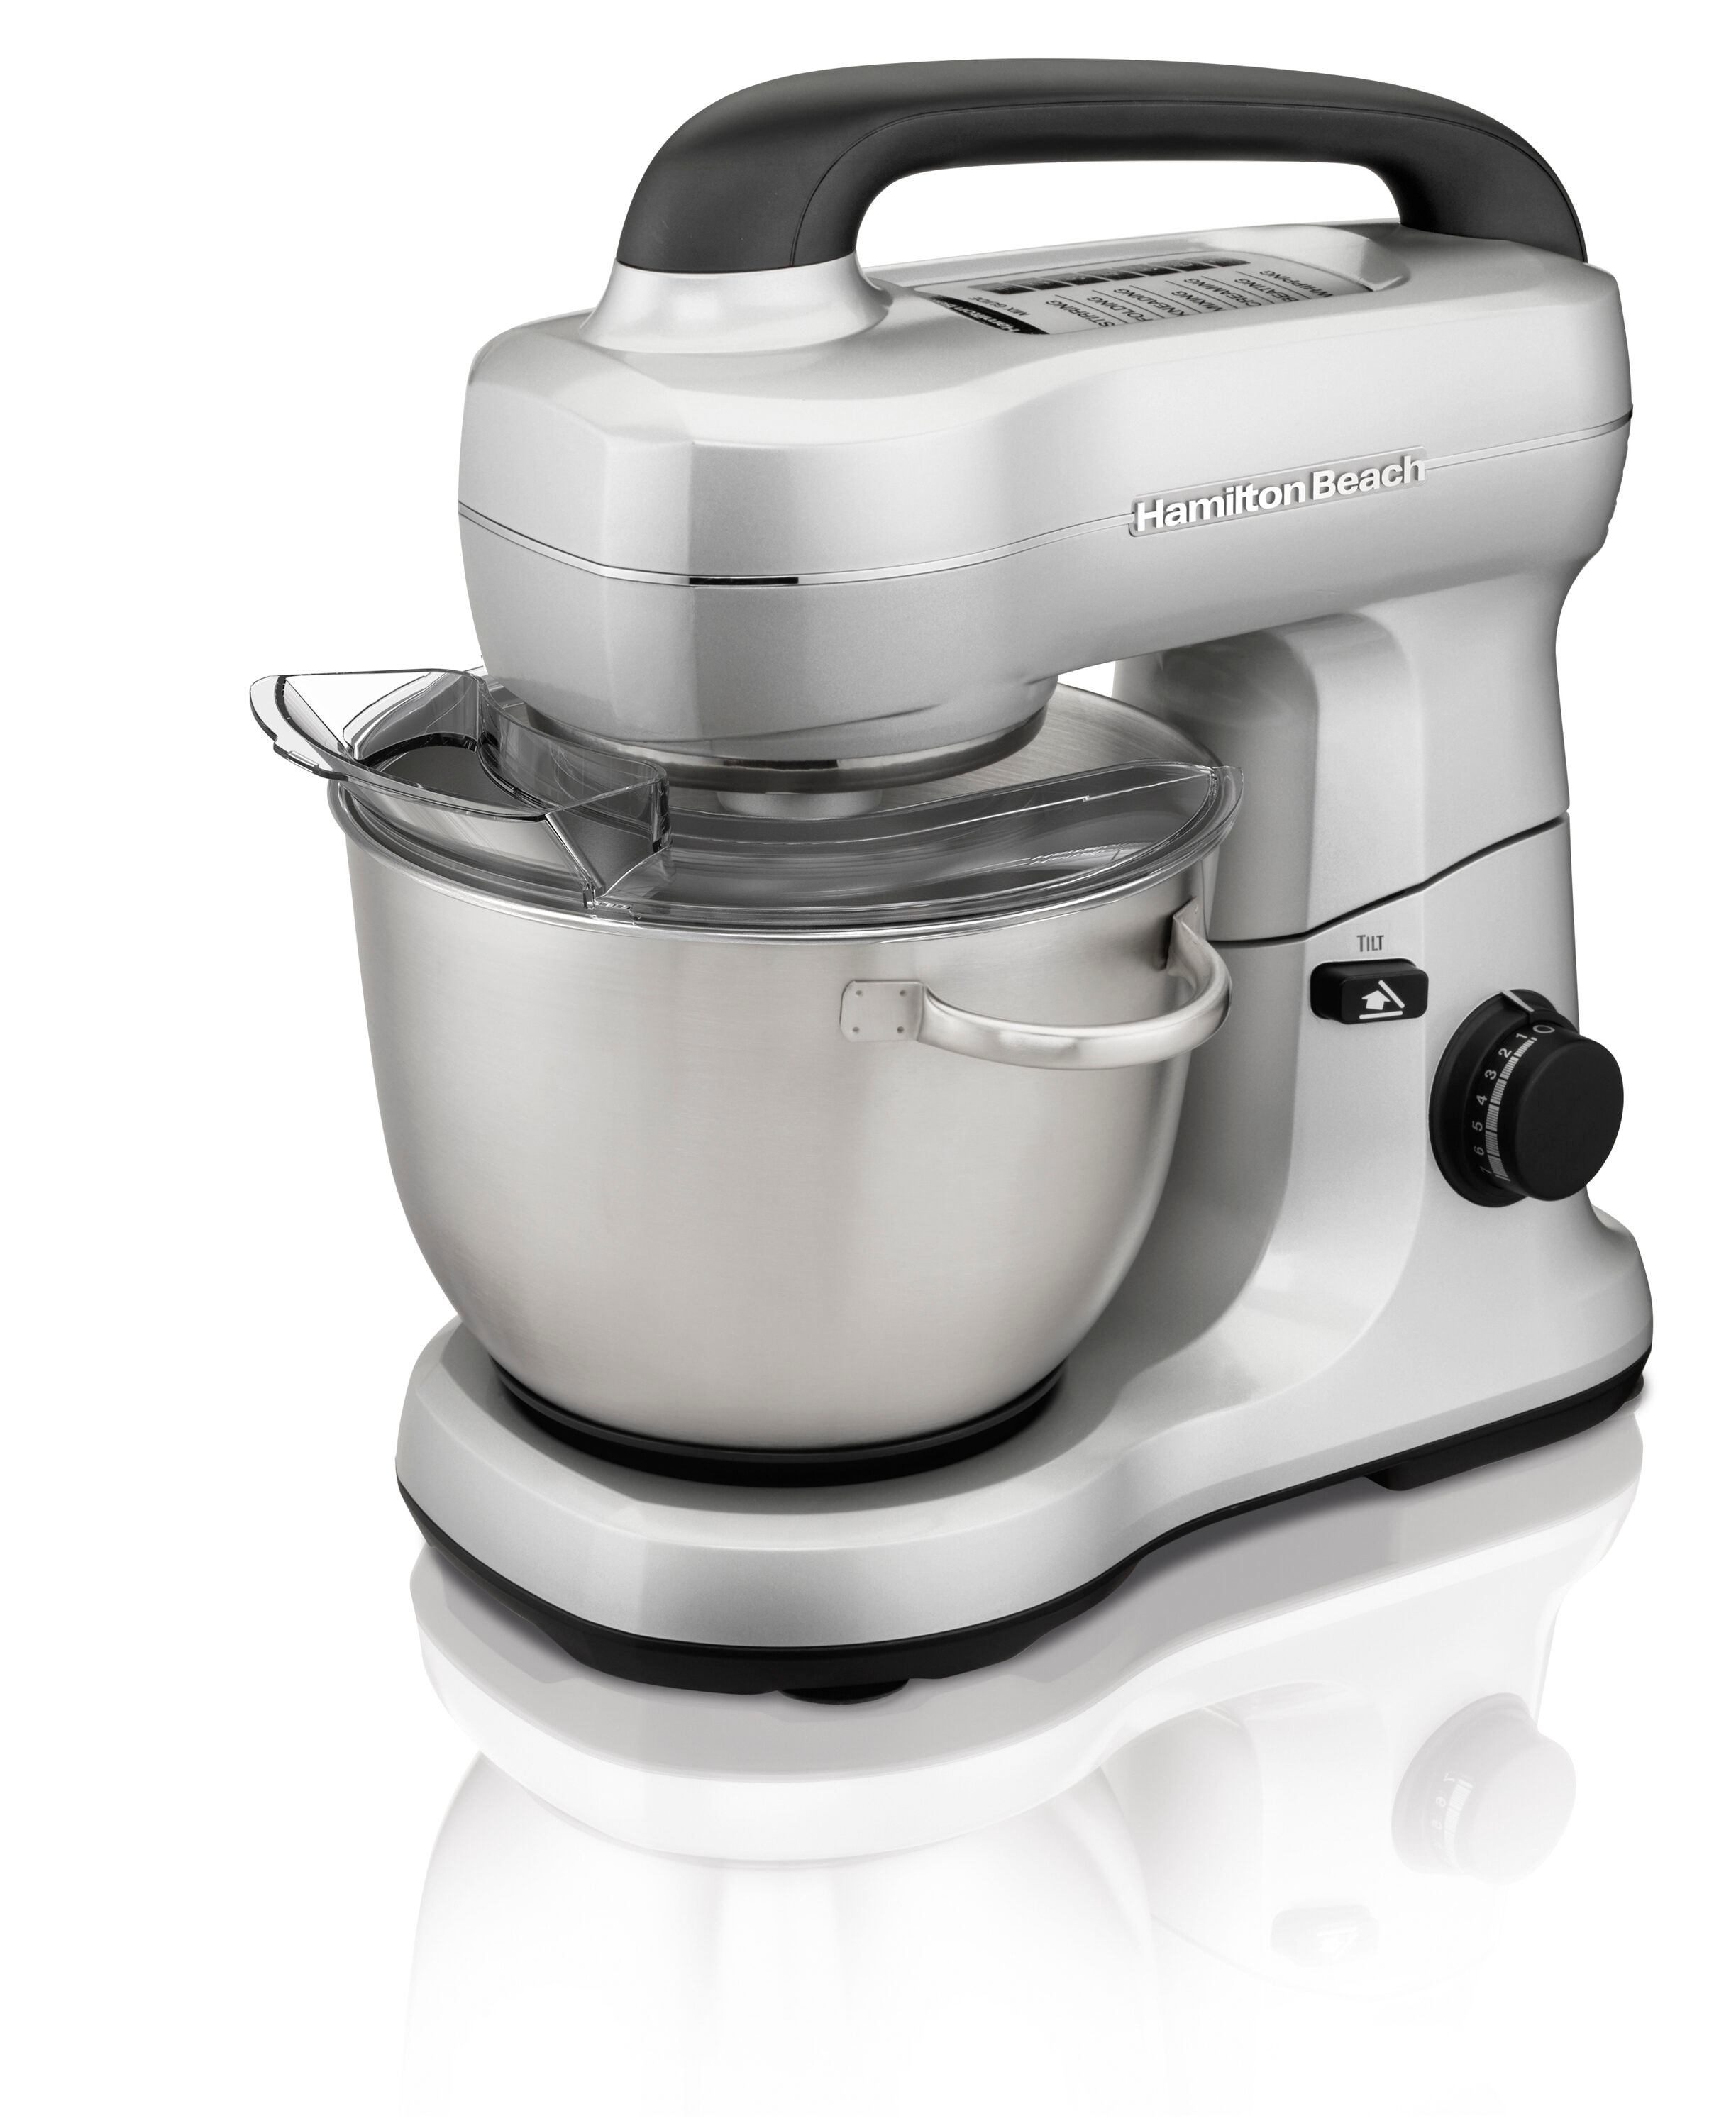 Kenmore Elite Ovation Stand Mixer - Burgundy, 5 qt - Food 4 Less